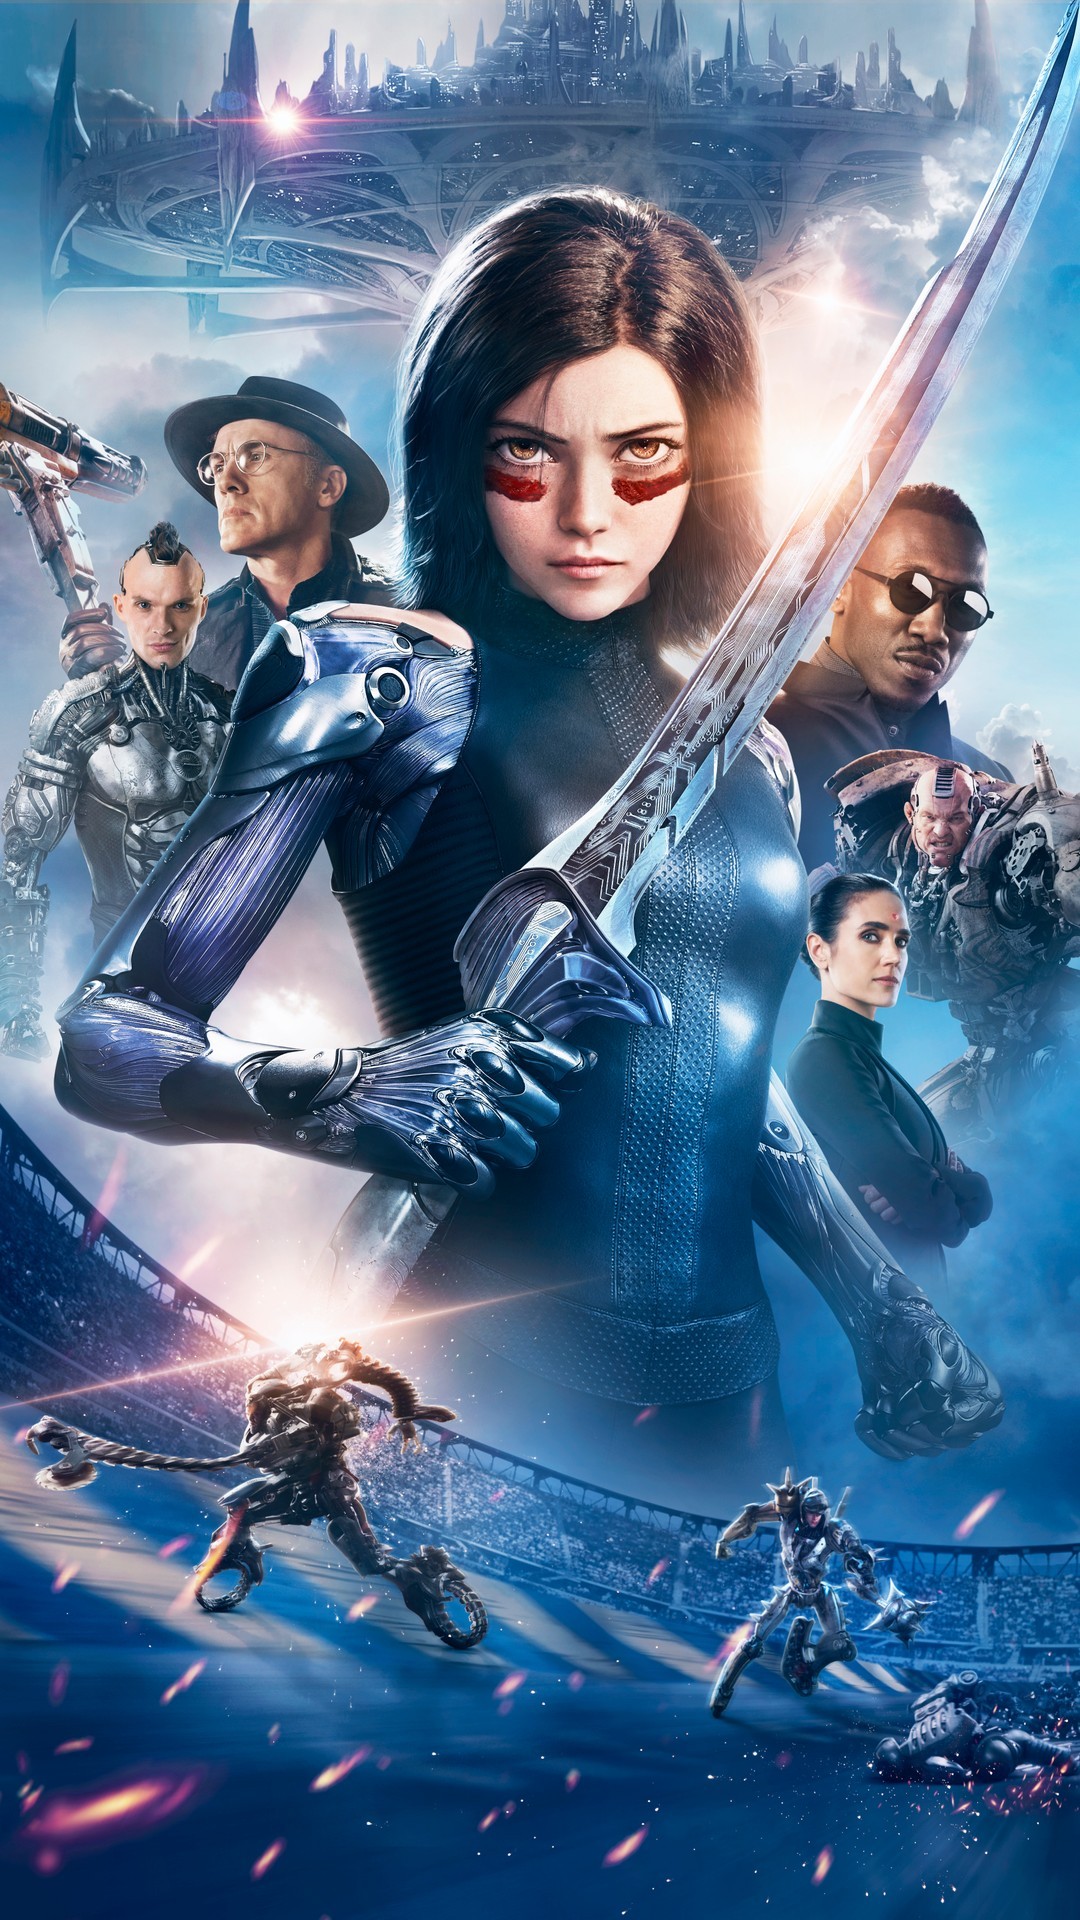 Alita Battle Angel iPhone Wallpaper With high-resolution 1080X1920 pixel. You can use this wallpaper for your iPhone 5, 6, 7, 8, X, XS, XR backgrounds, Mobile Screensaver, or iPad Lock Screen